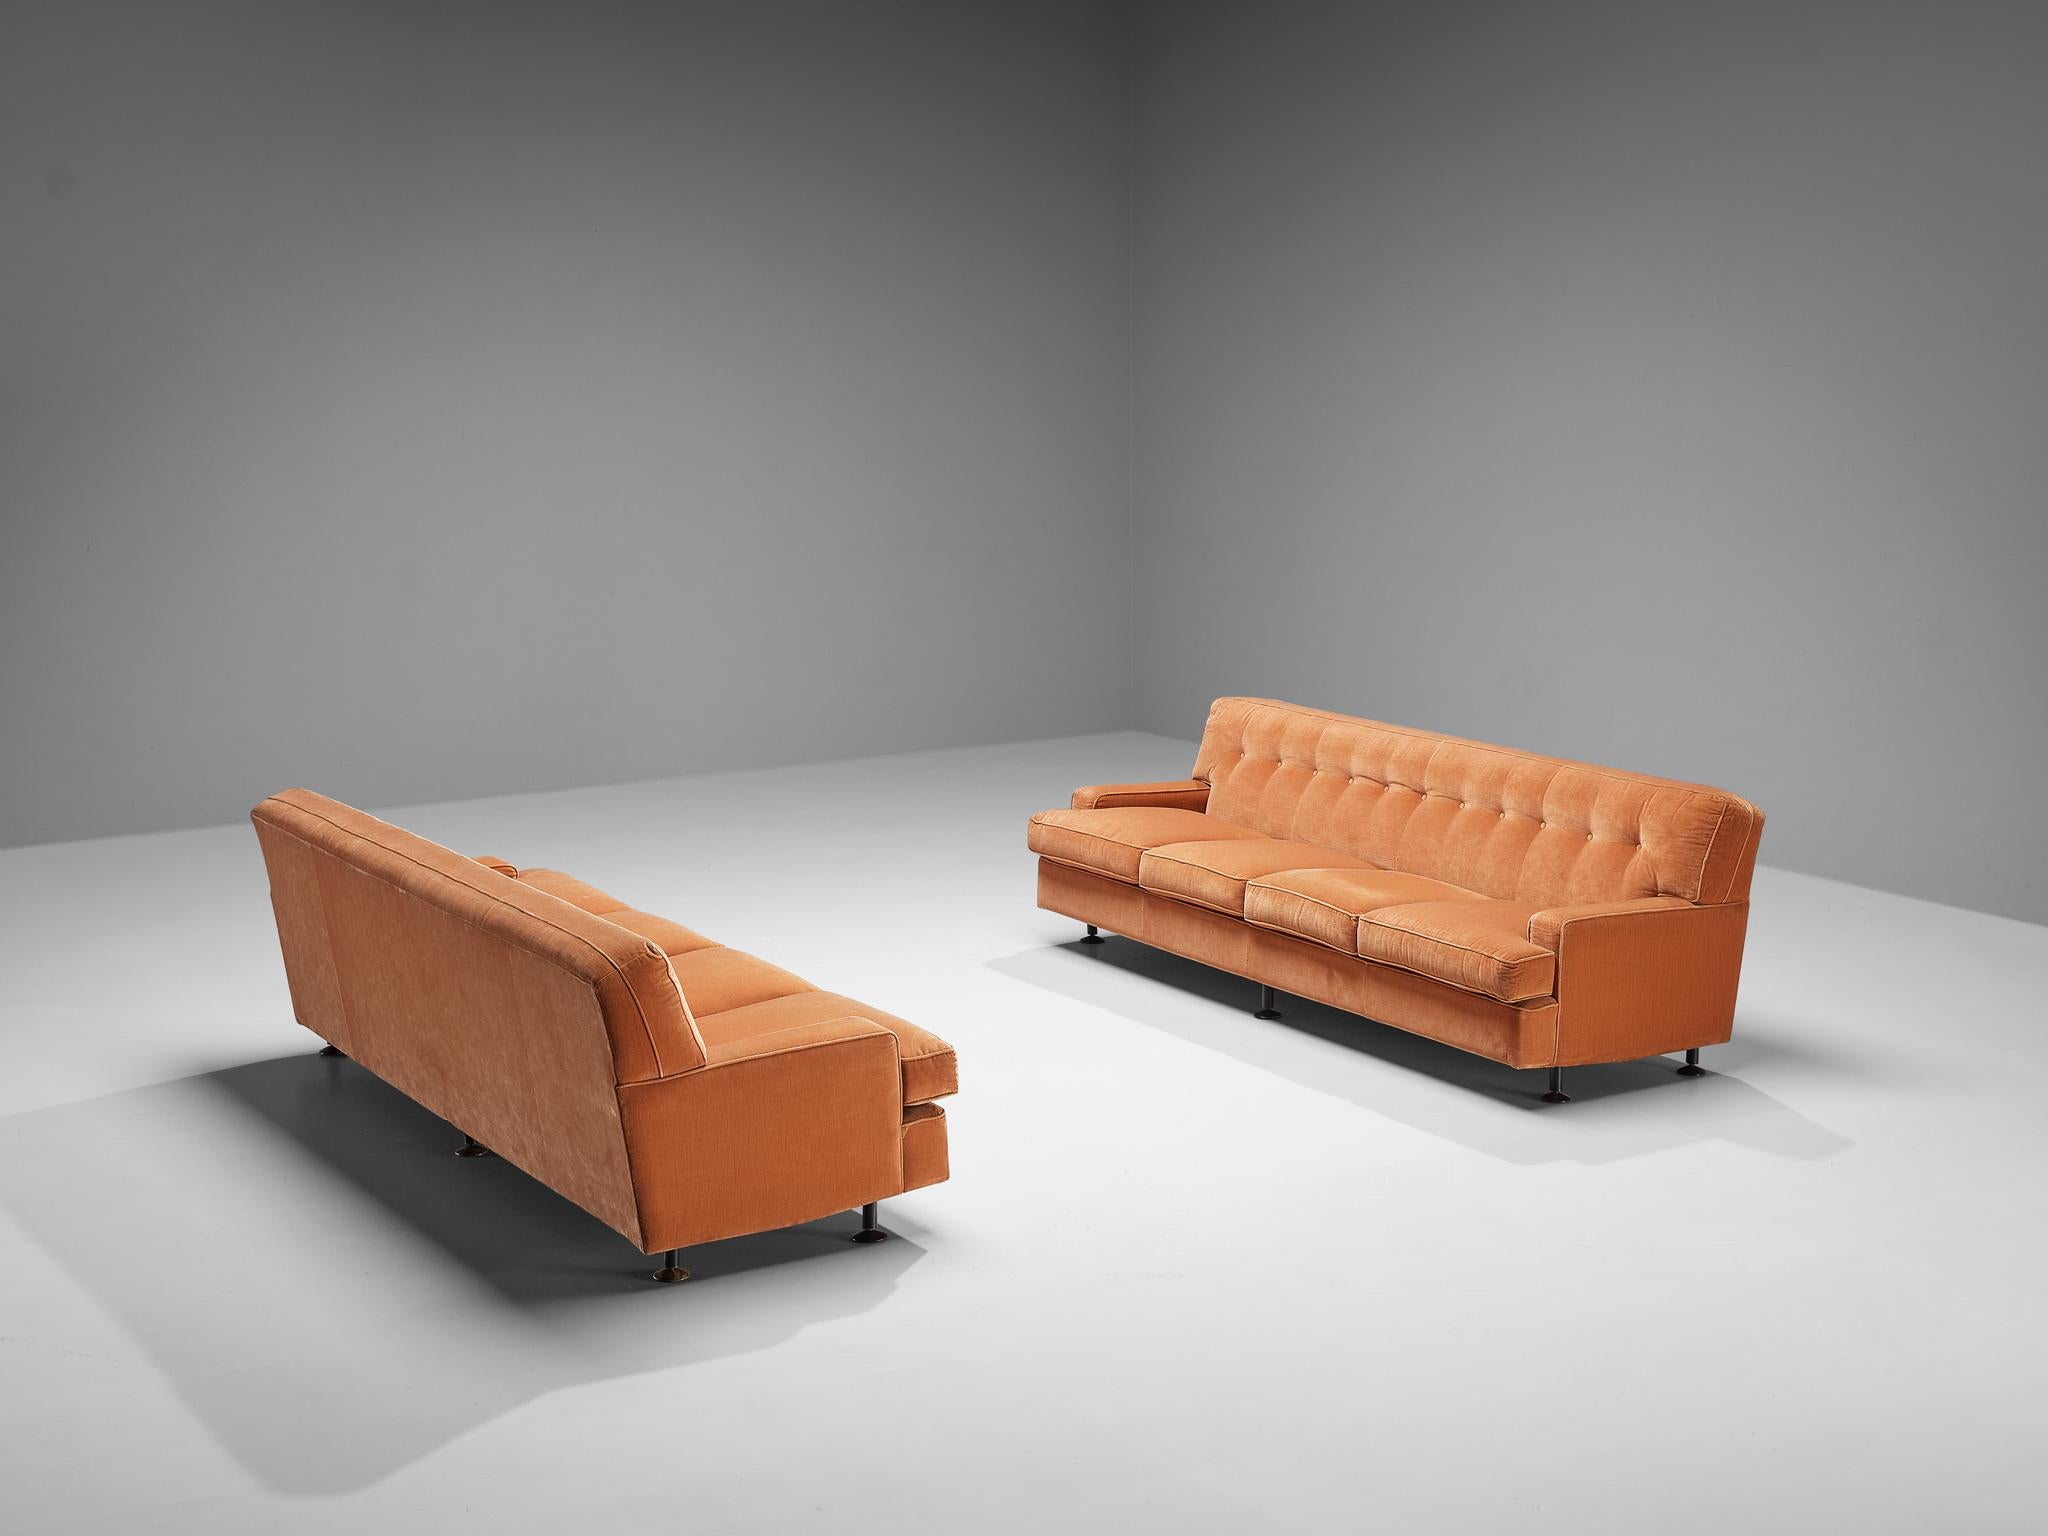 Marco Zanuso for Arflex, pair of 'Square' sofas, corduroy, coated steel, Italy, 1962 

This distinctive Square sofa by Marco Zanuso is made for the Italian furniture company Arflex in 1962. Characteristic for this model are the low positioned